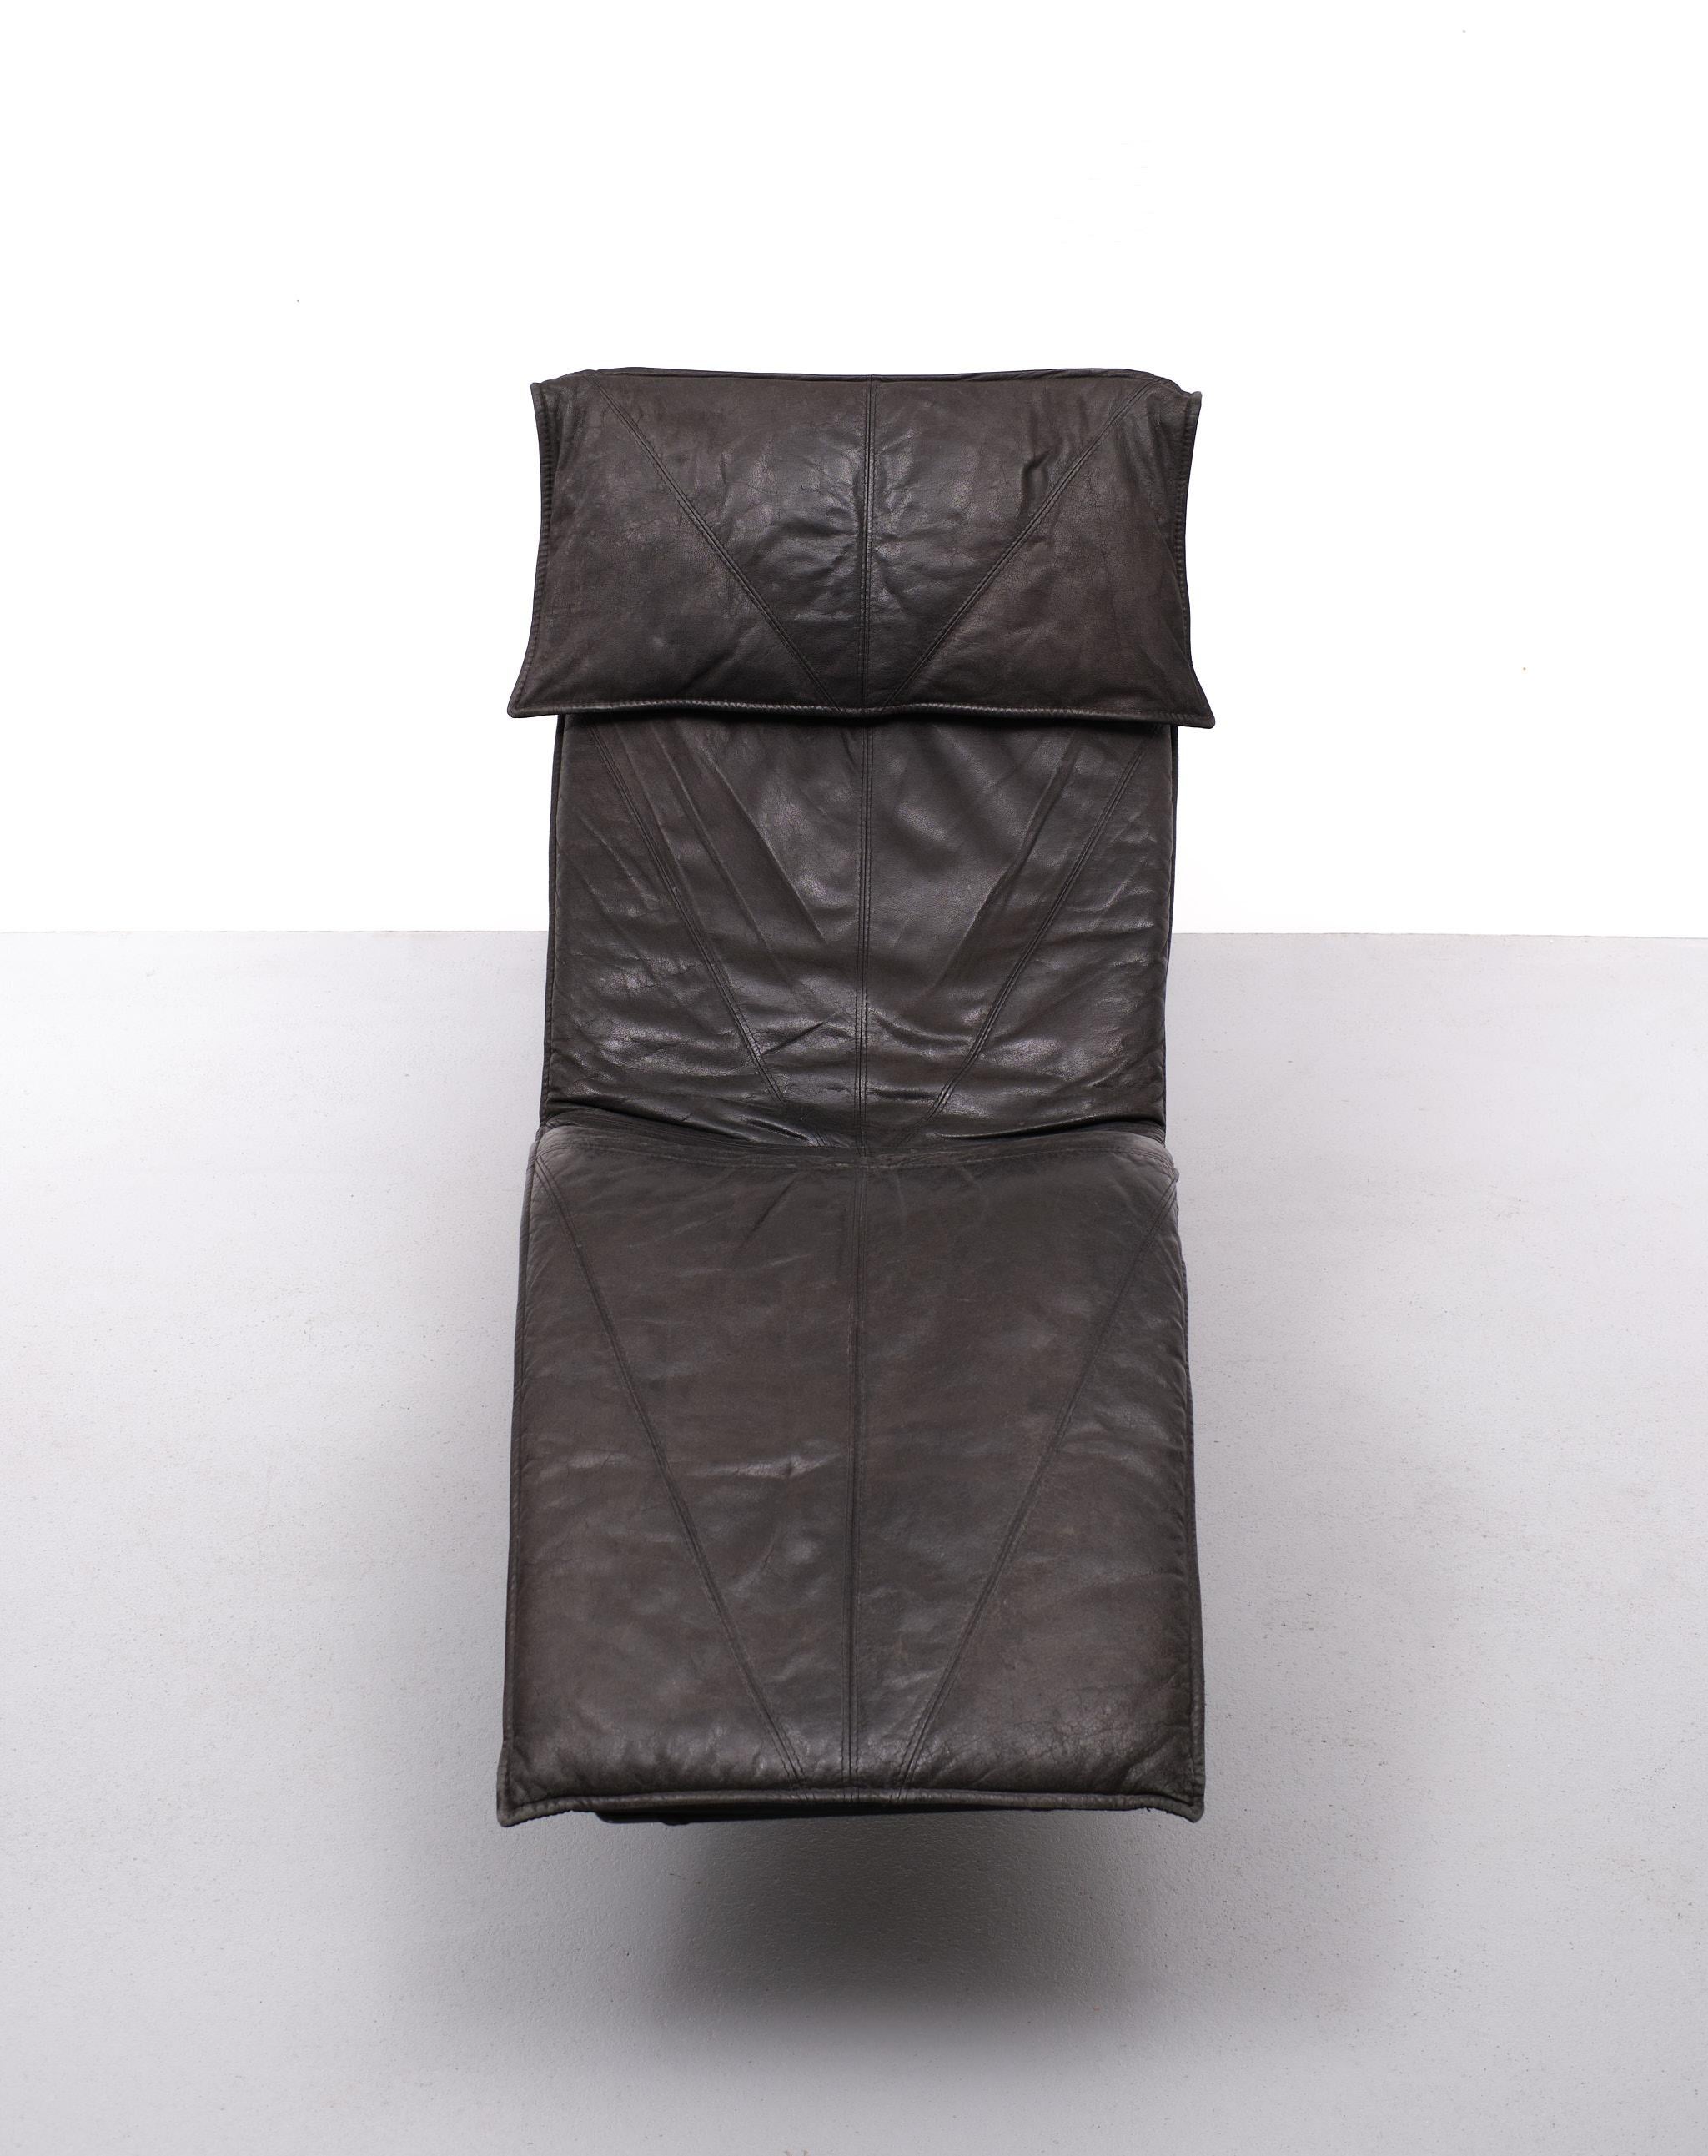 Modern  Leather Lounge Chair by Tord Björklund for Ikea, 1980s For Sale